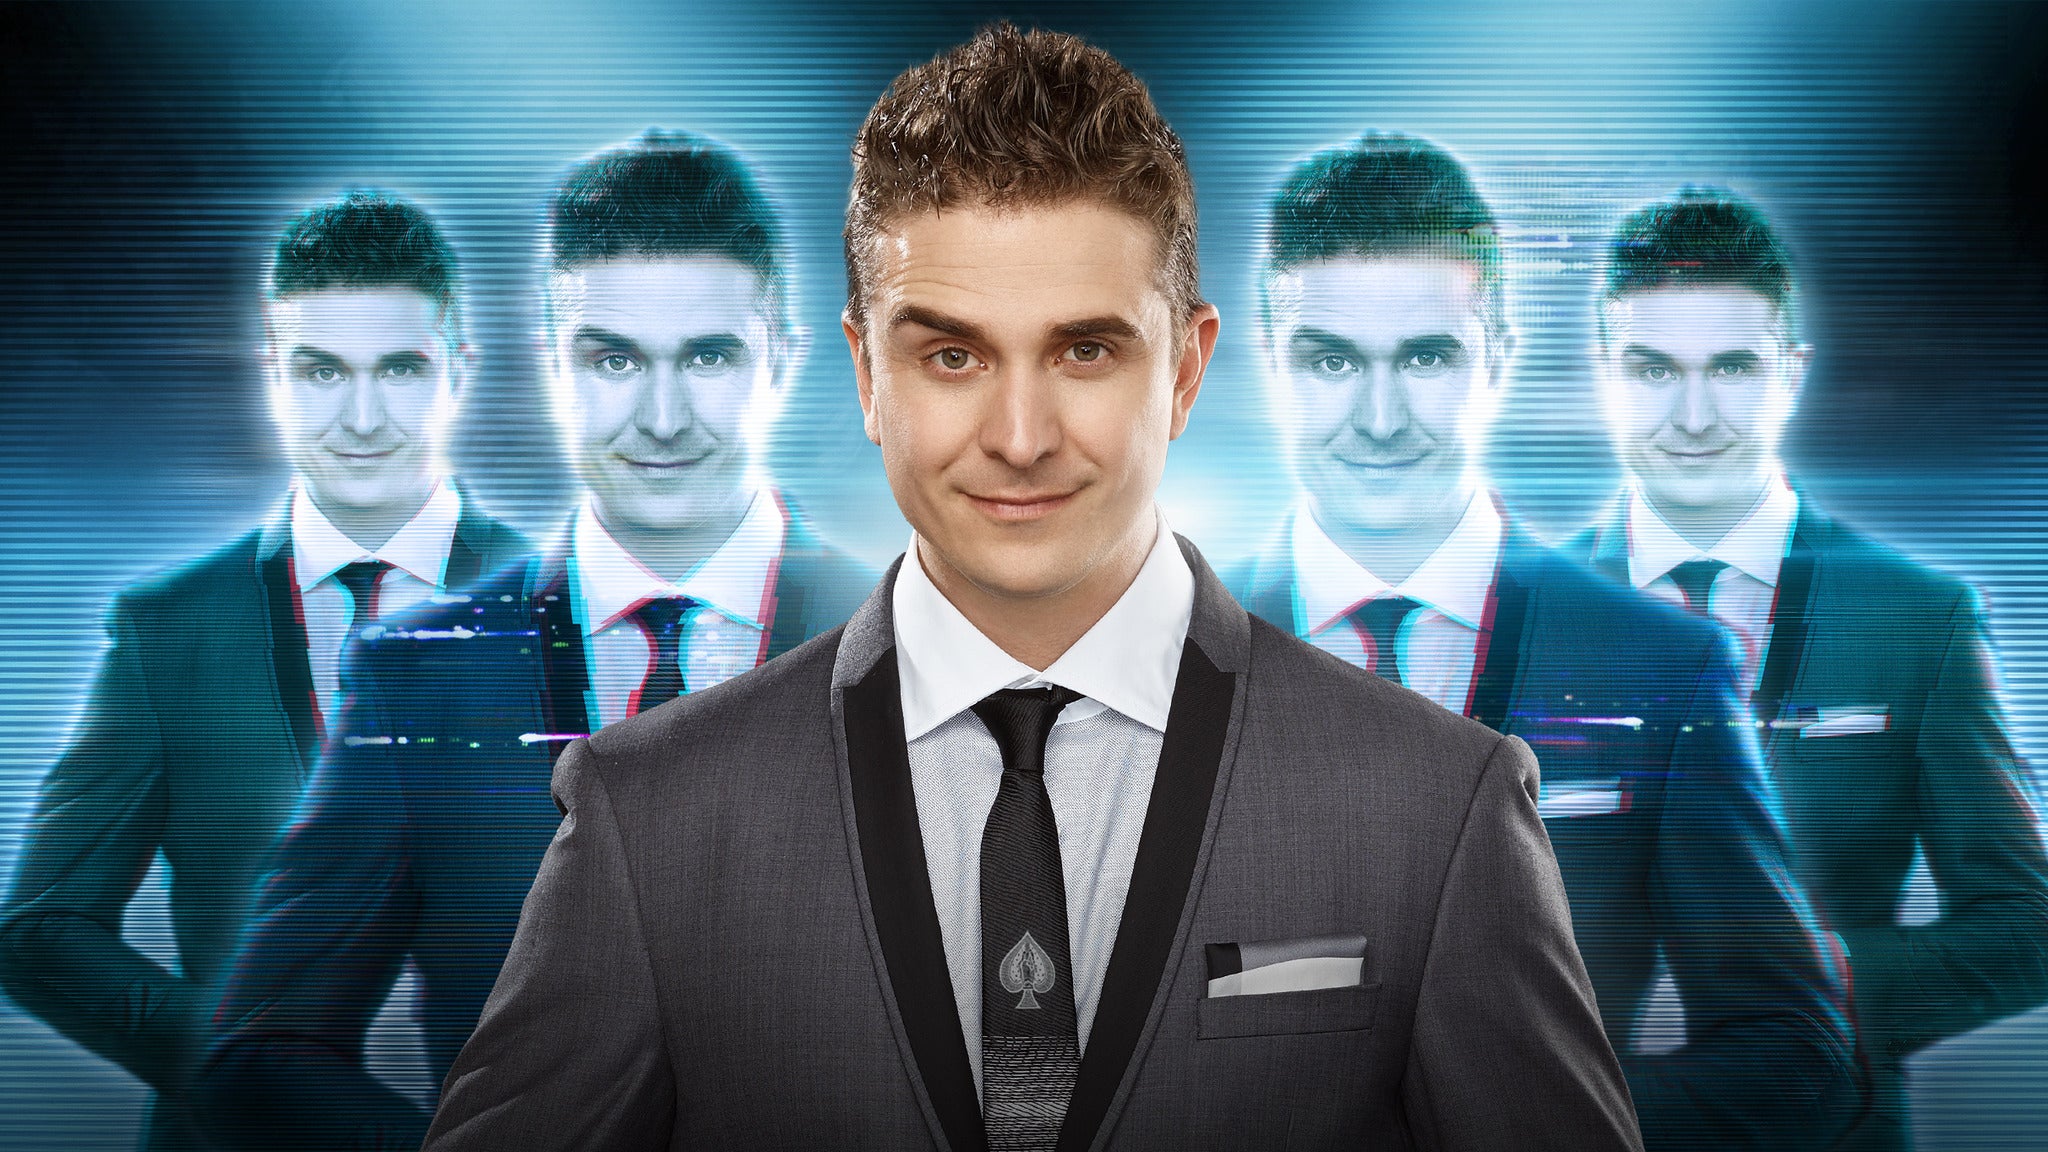 The Illusionists Present Adam Trent in Pensacola promo photo for Broadway Subscribers presale offer code